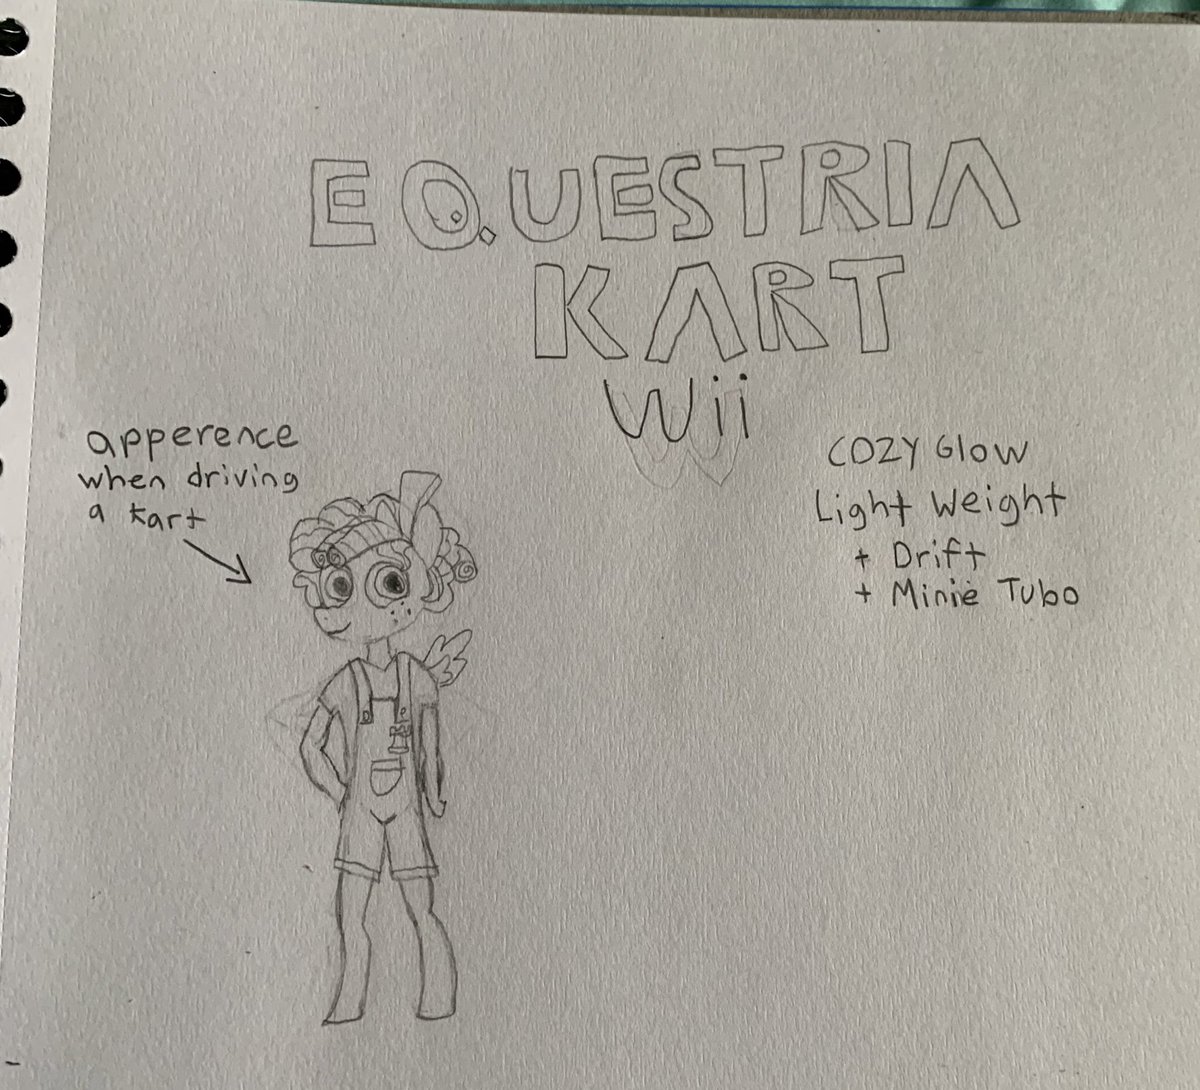 Ok I did it the arm look shit and I was to lazy to draw hands (I don’t even know if I wanna give them hands anymore) but I did it anthro cozy glow for Equestriakart Wii I’ll draw her bike appearance later (I’ll probably redraw the whole thing at some point)